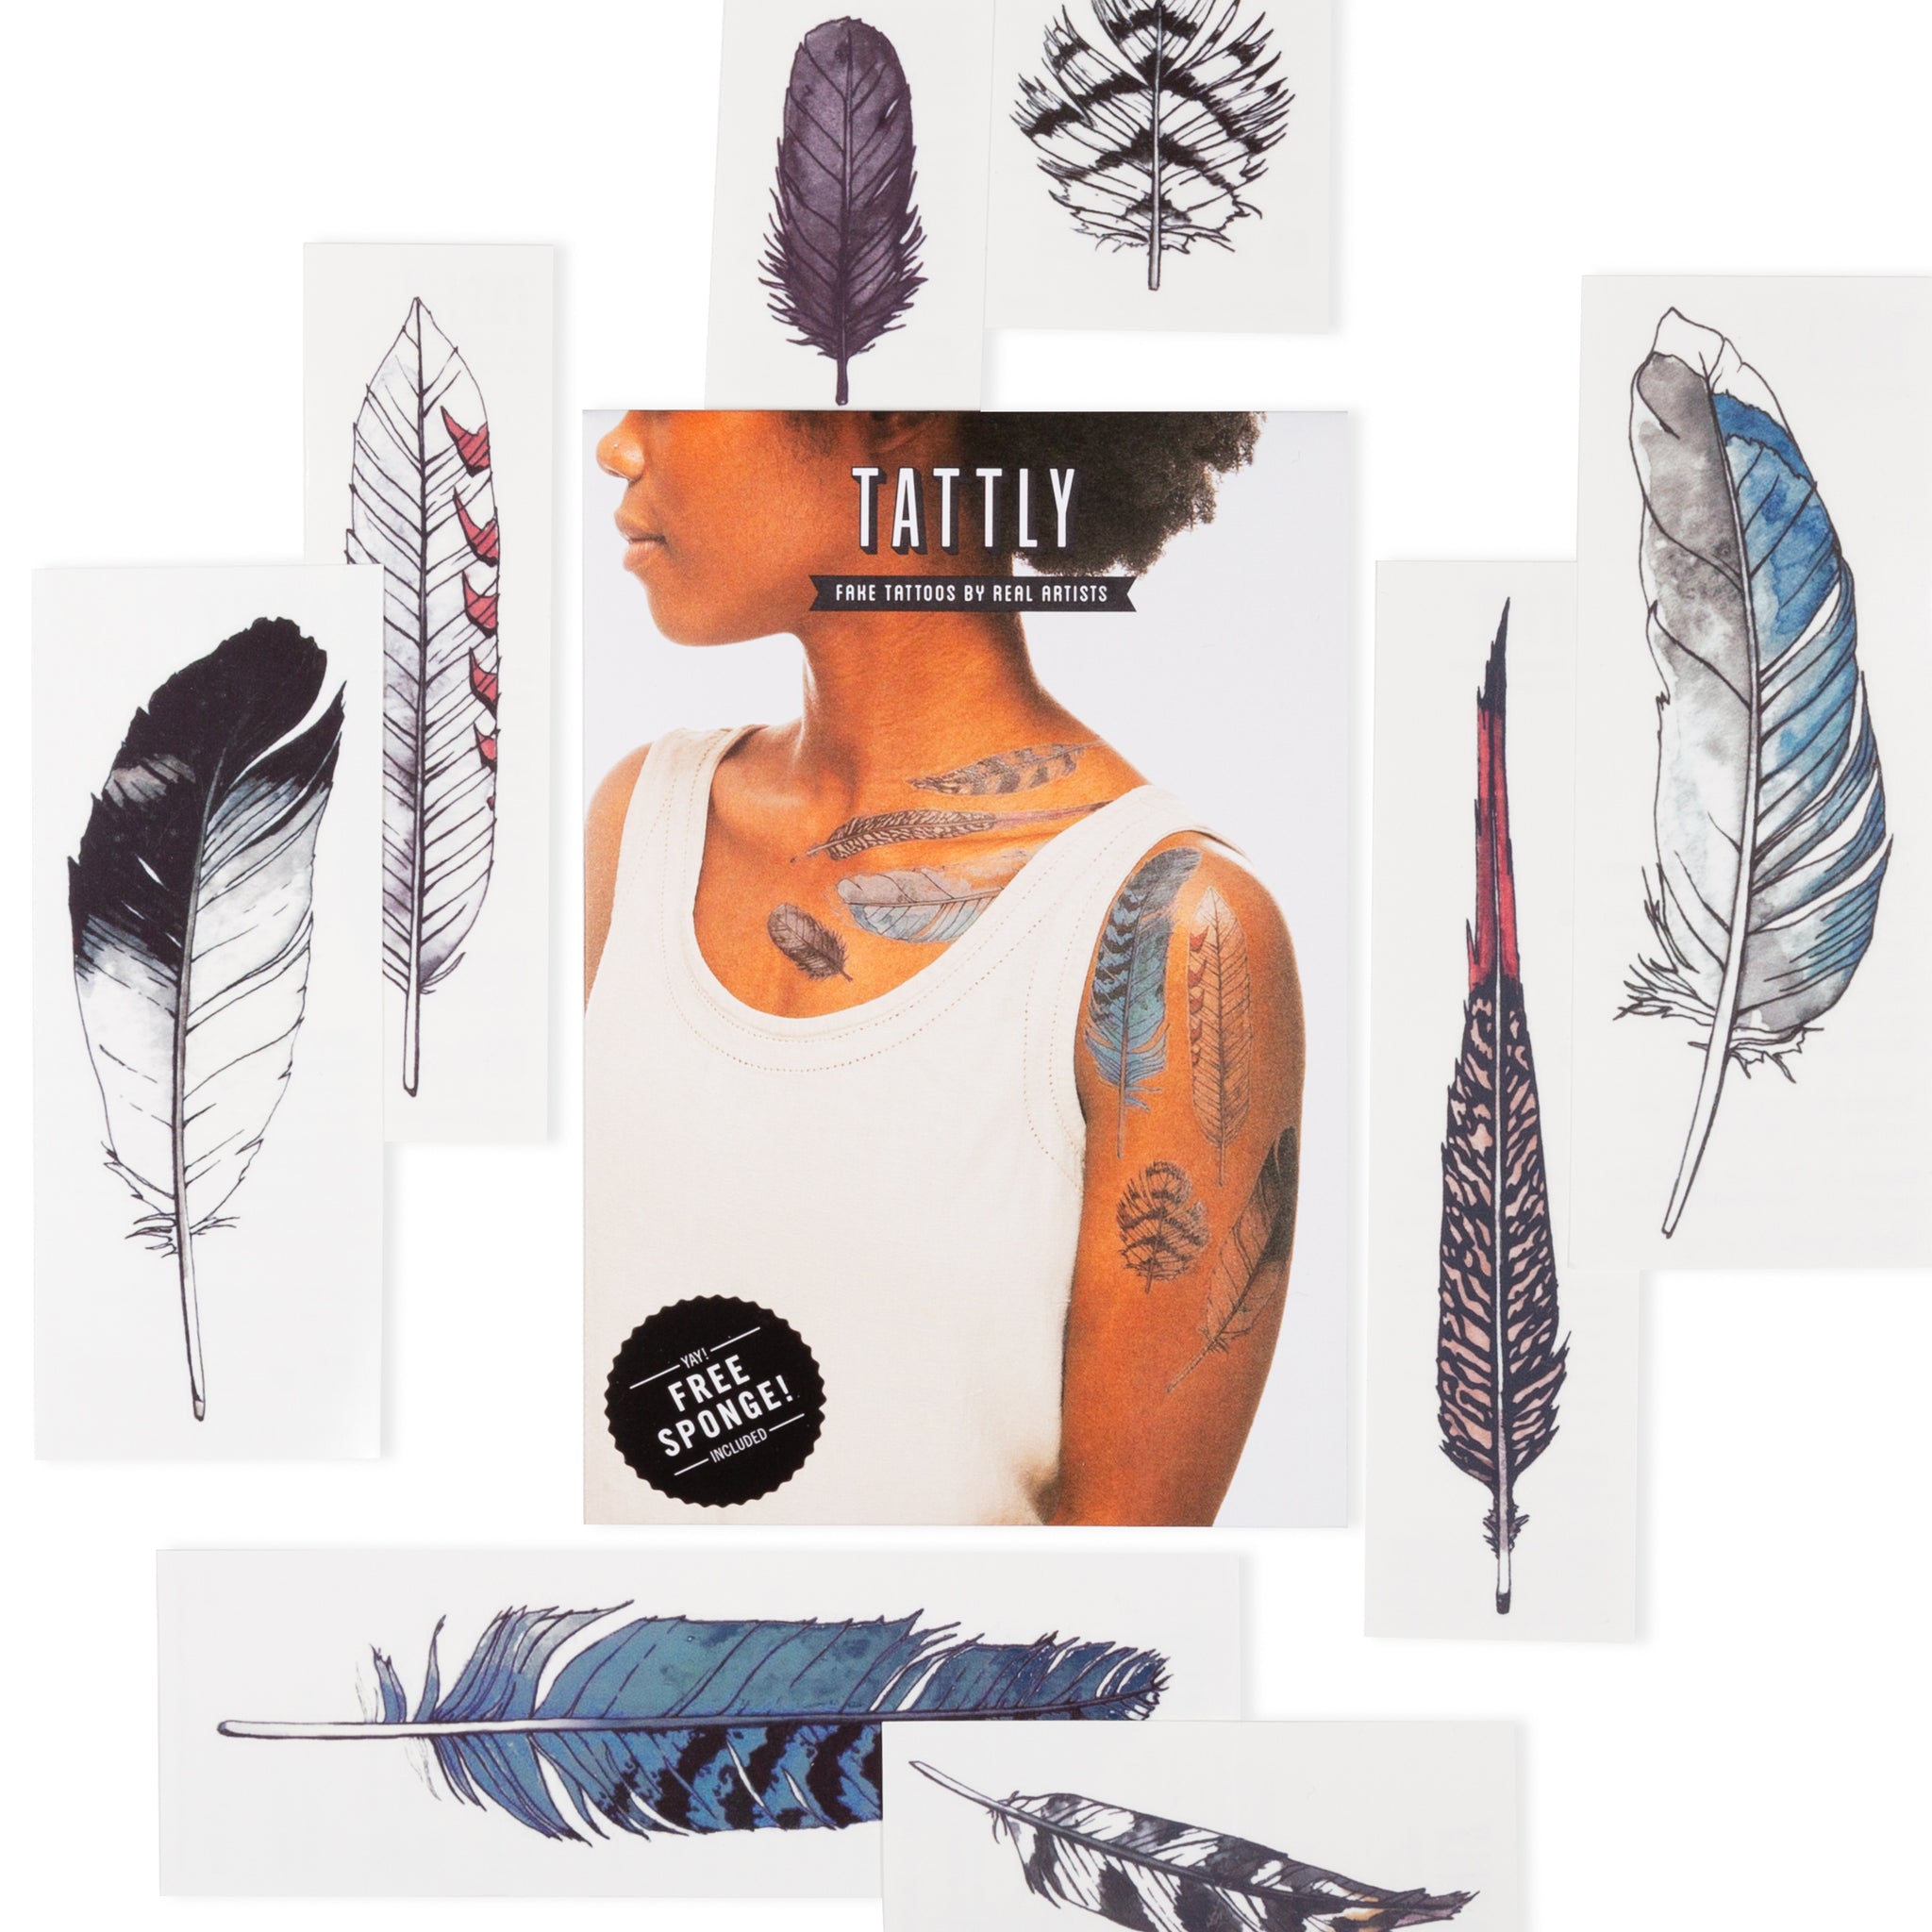 Feather Tattoos Designs Ideas and Meanings  TatRing